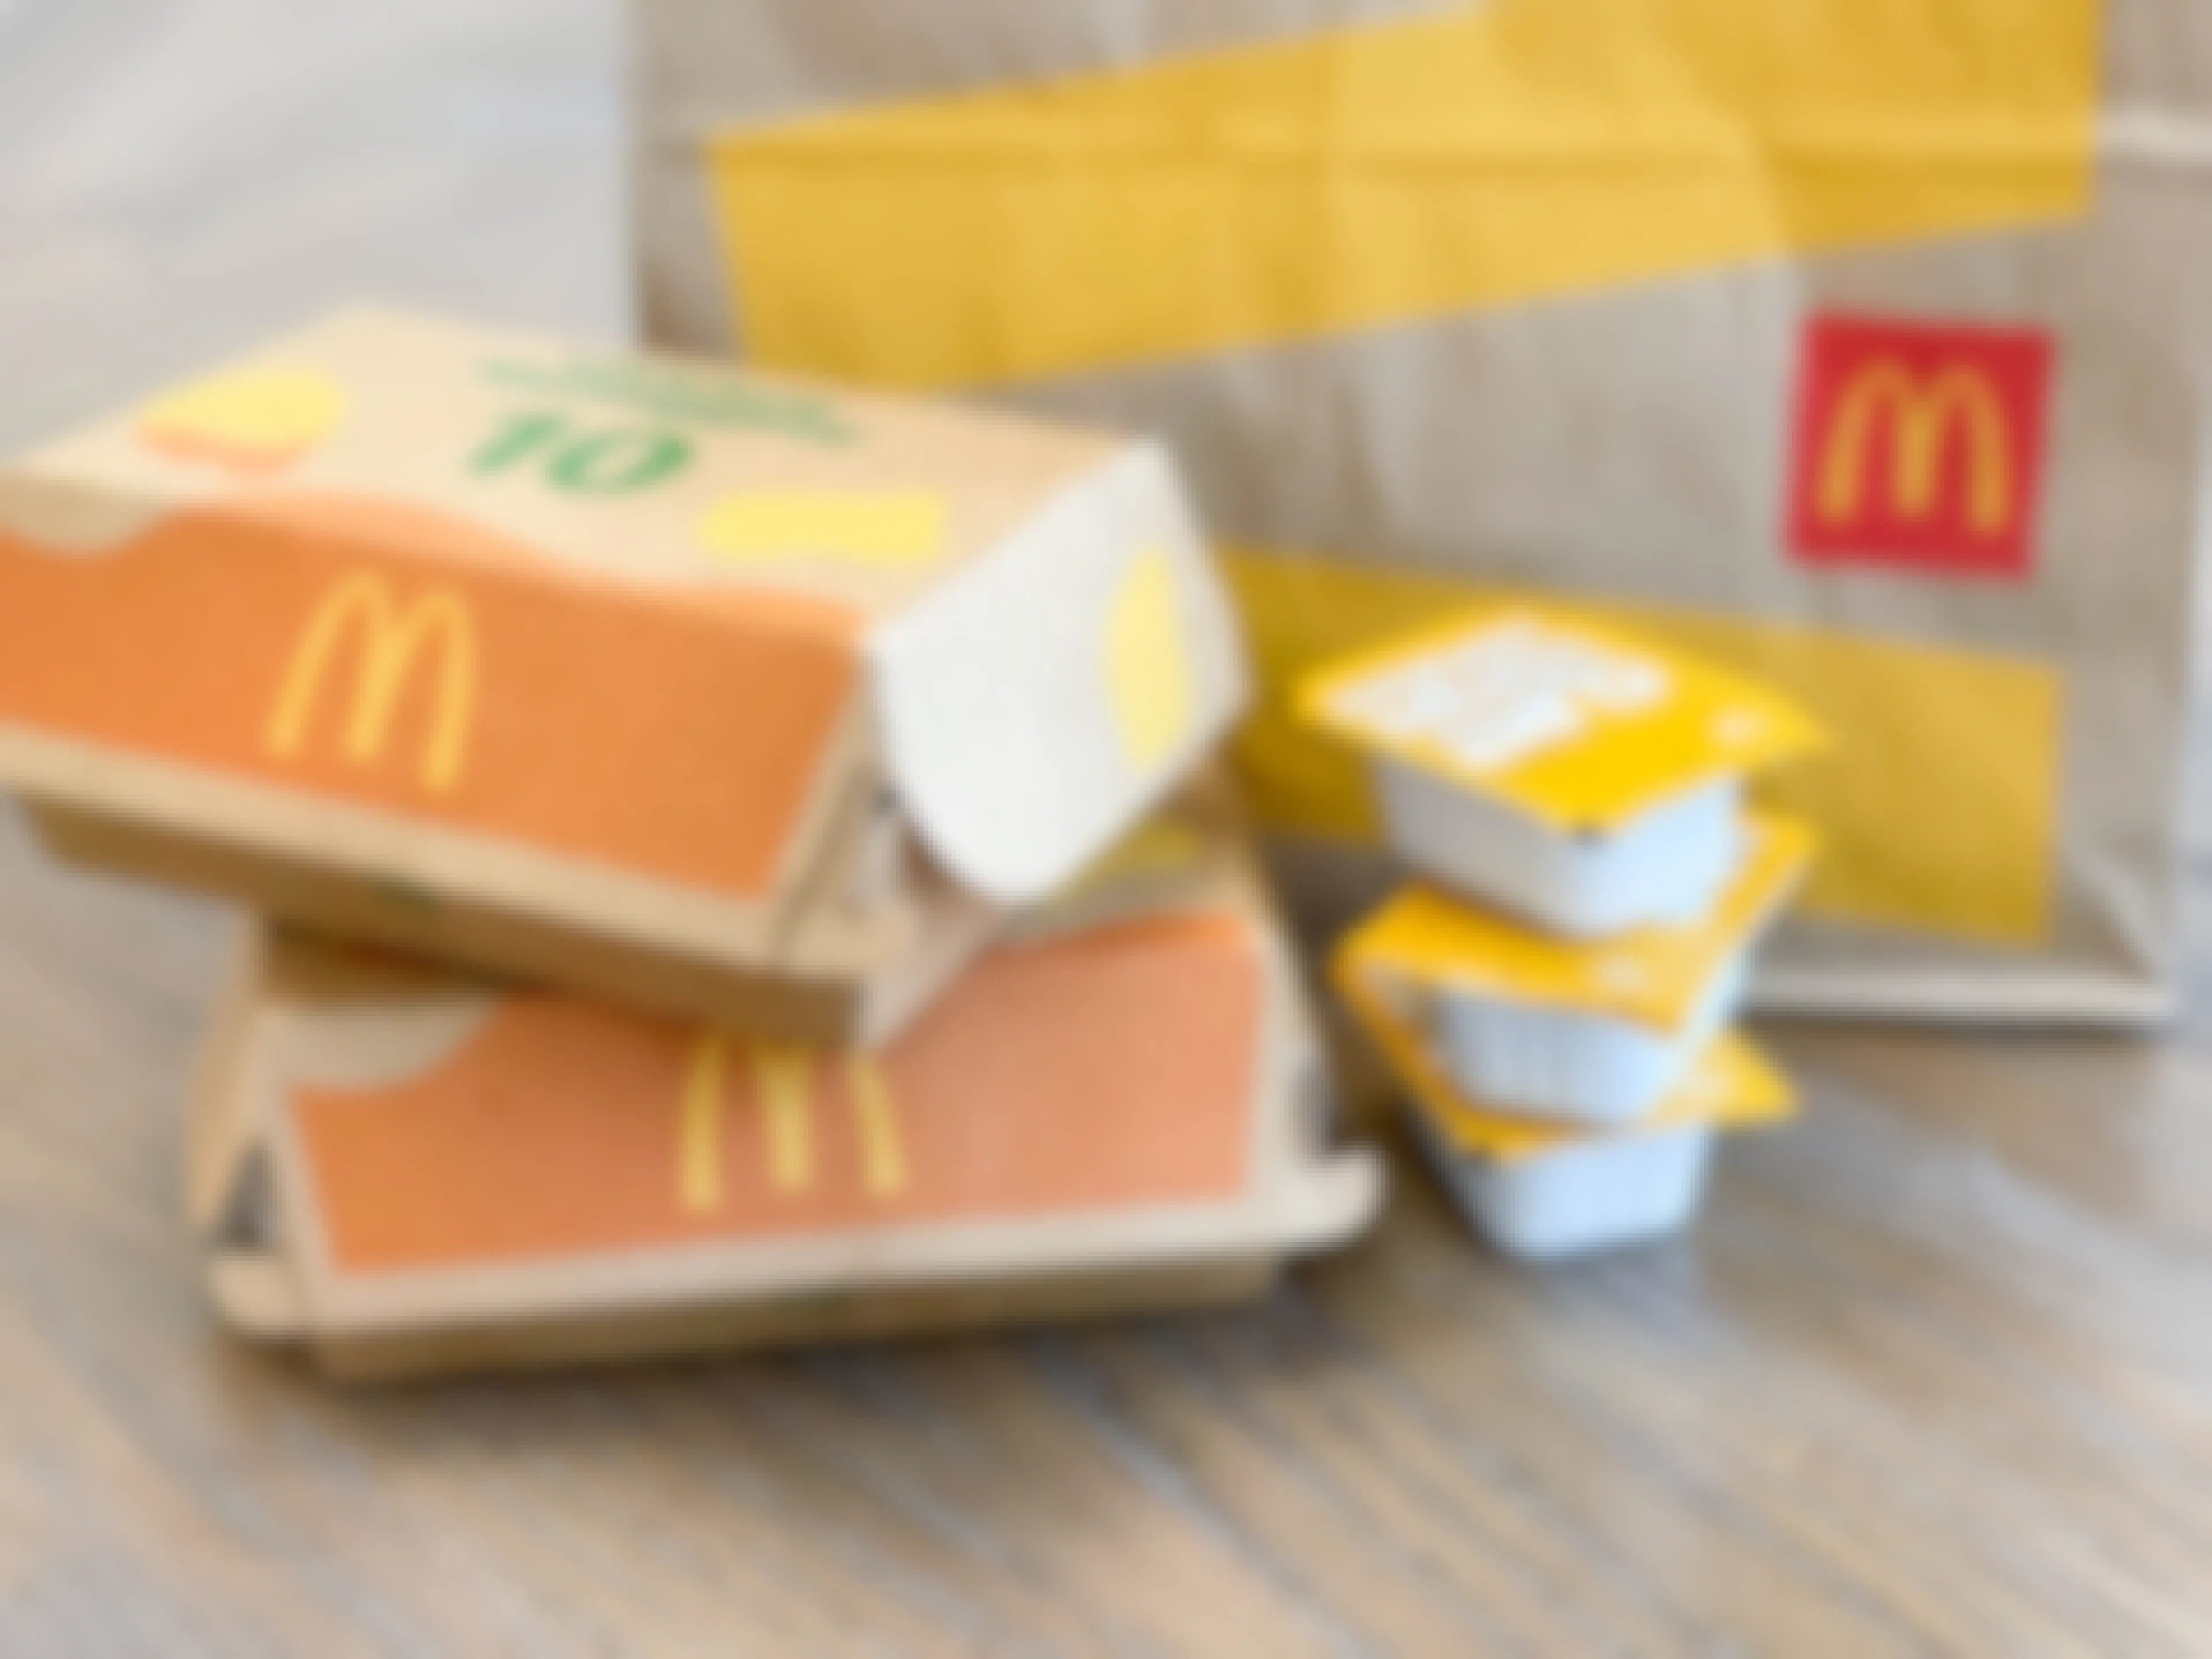 Two 10 piece chicken McNugget boxes stacked on a table next to a stack of honey mustard sauces and a McDonald's bag.